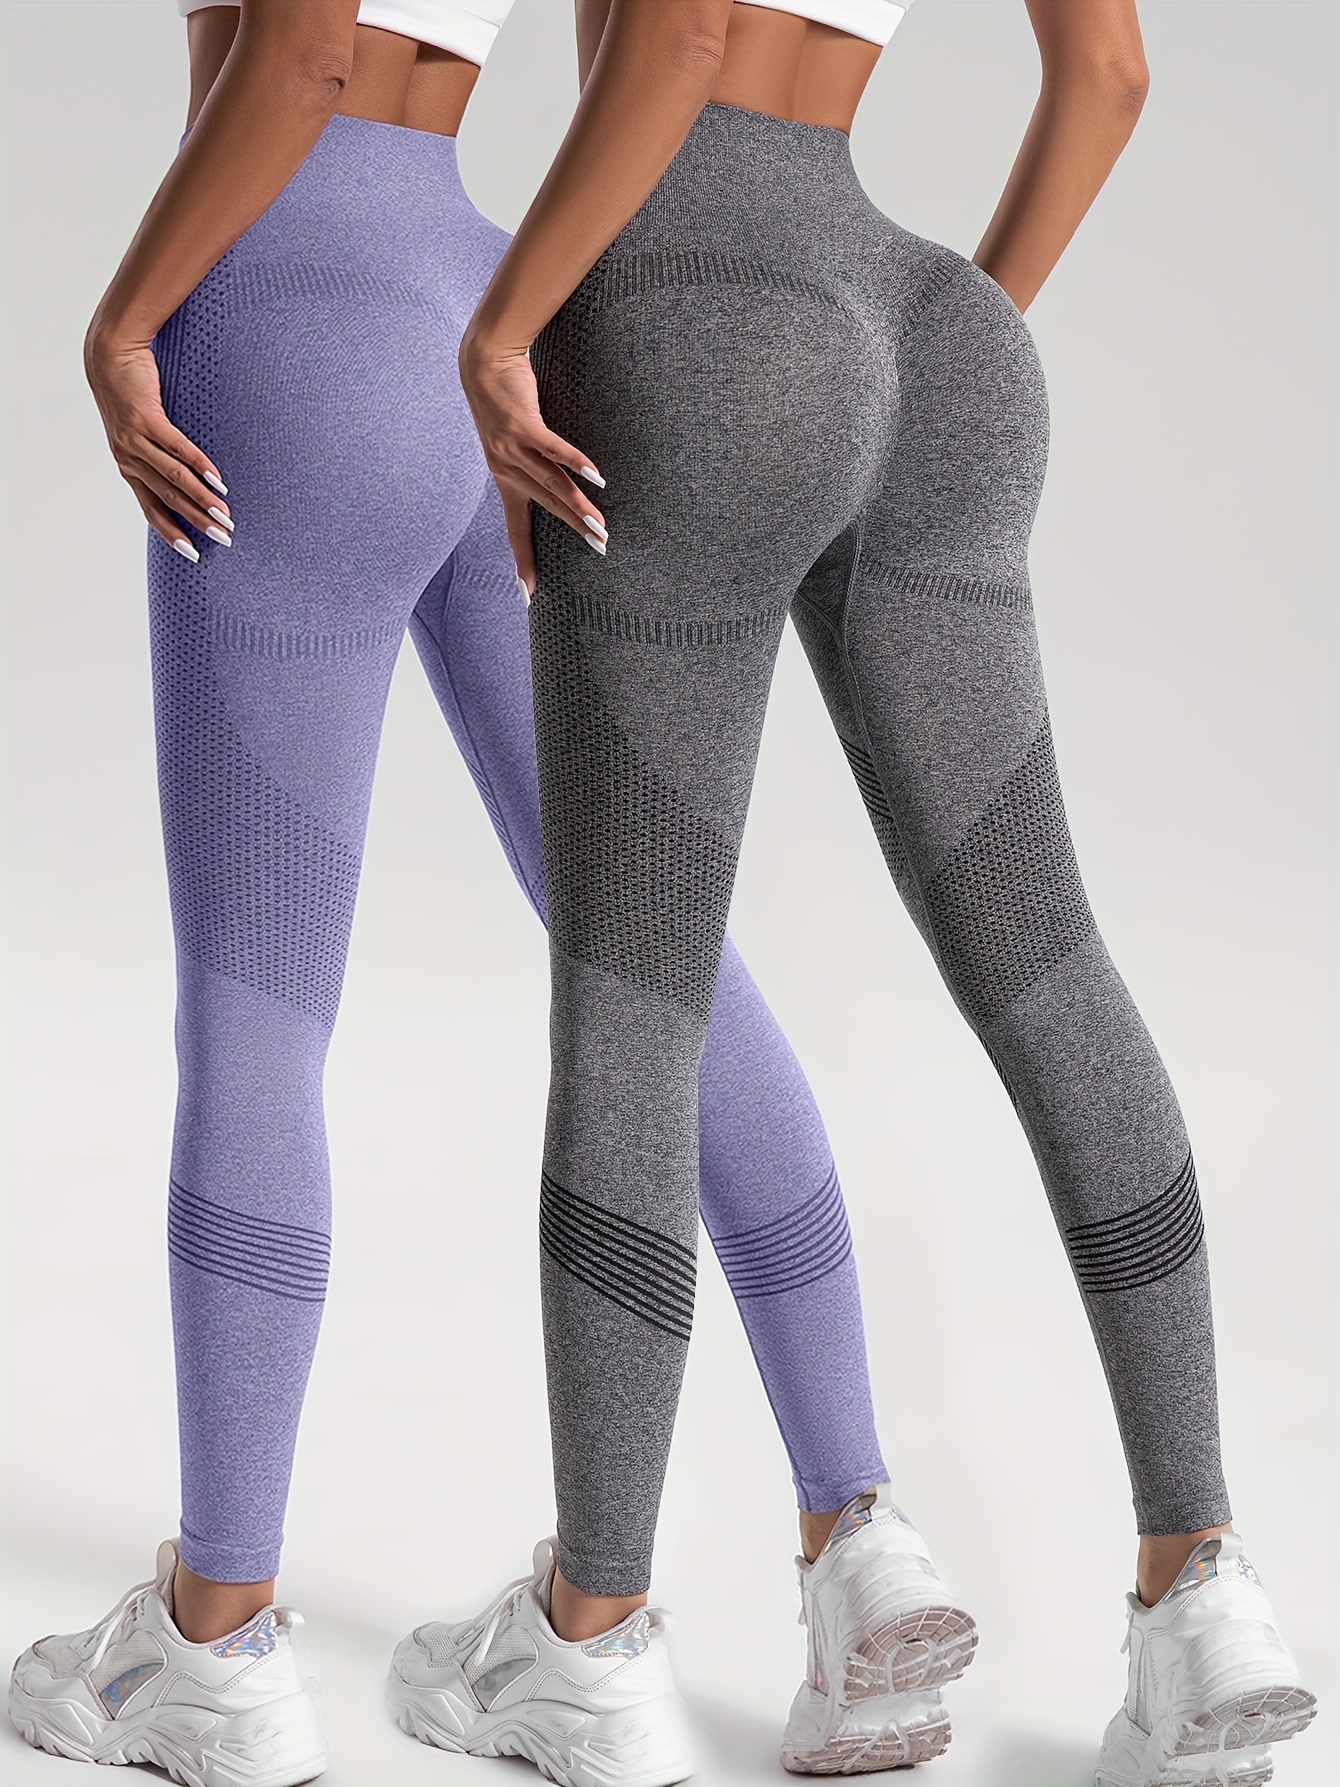 Grey Soft Move leggings, Sports leggings and trousers for women